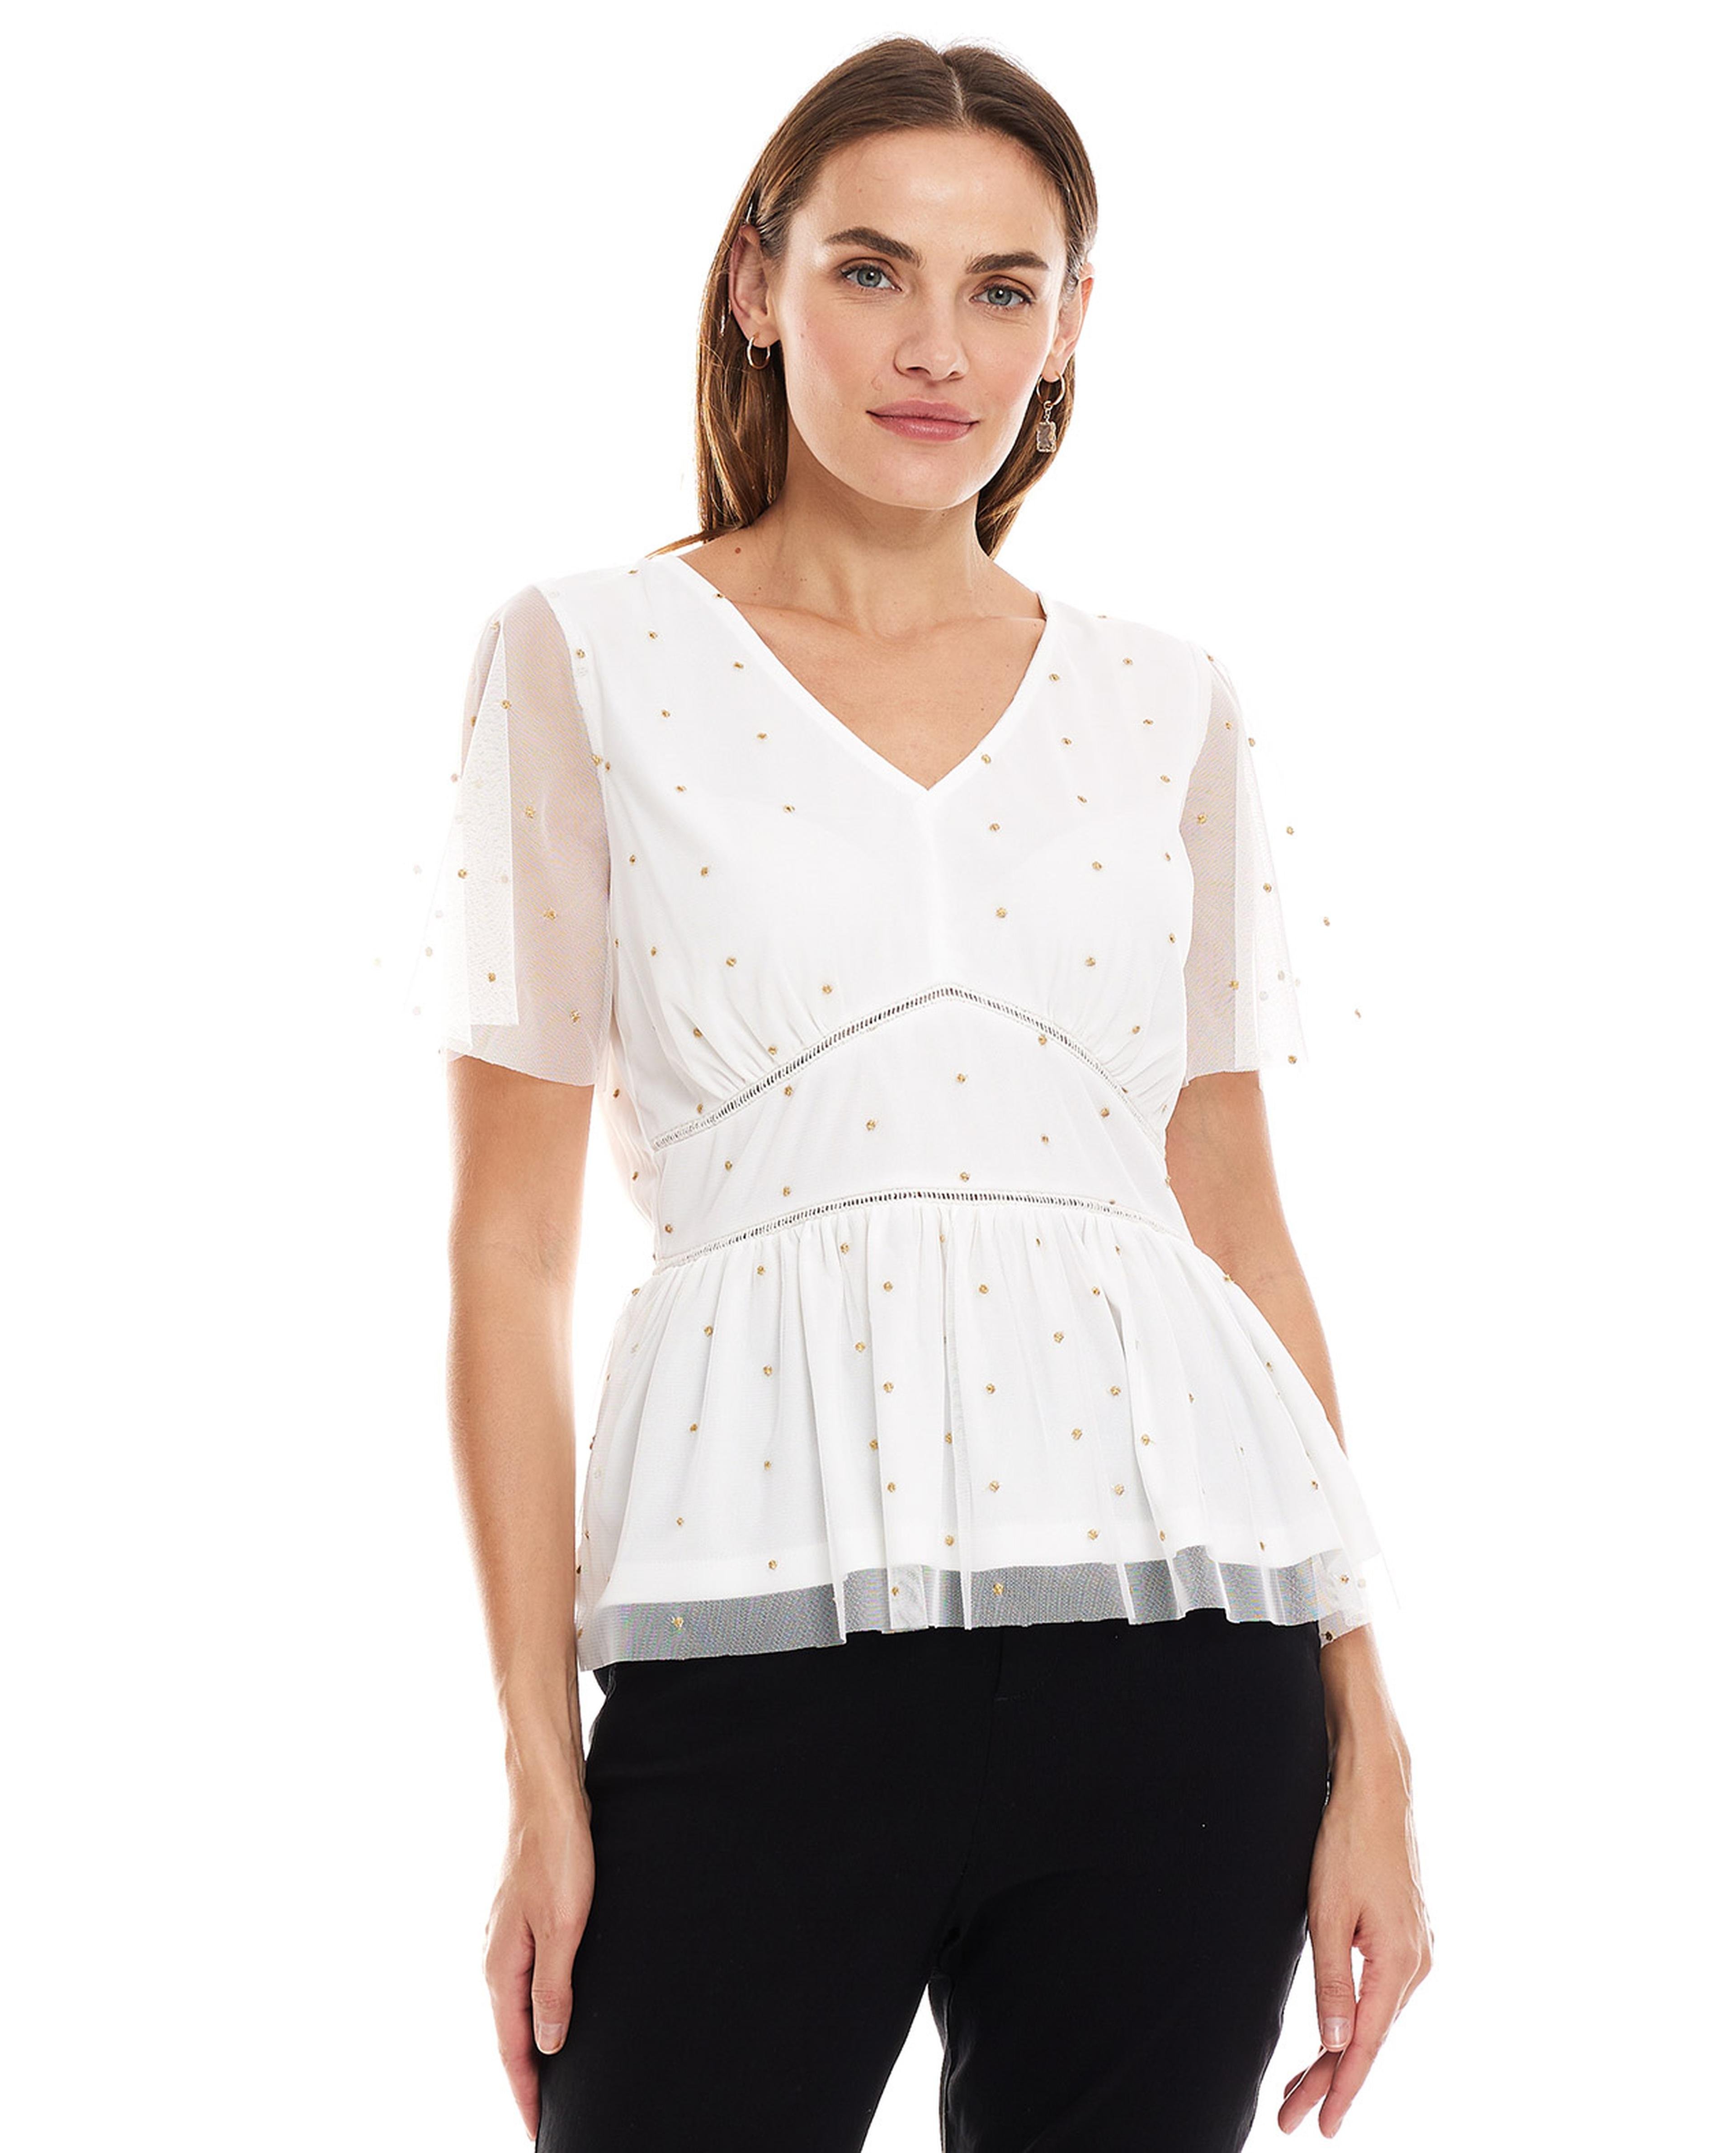 Embroidered Top with V-Neck and Bell Sleeves